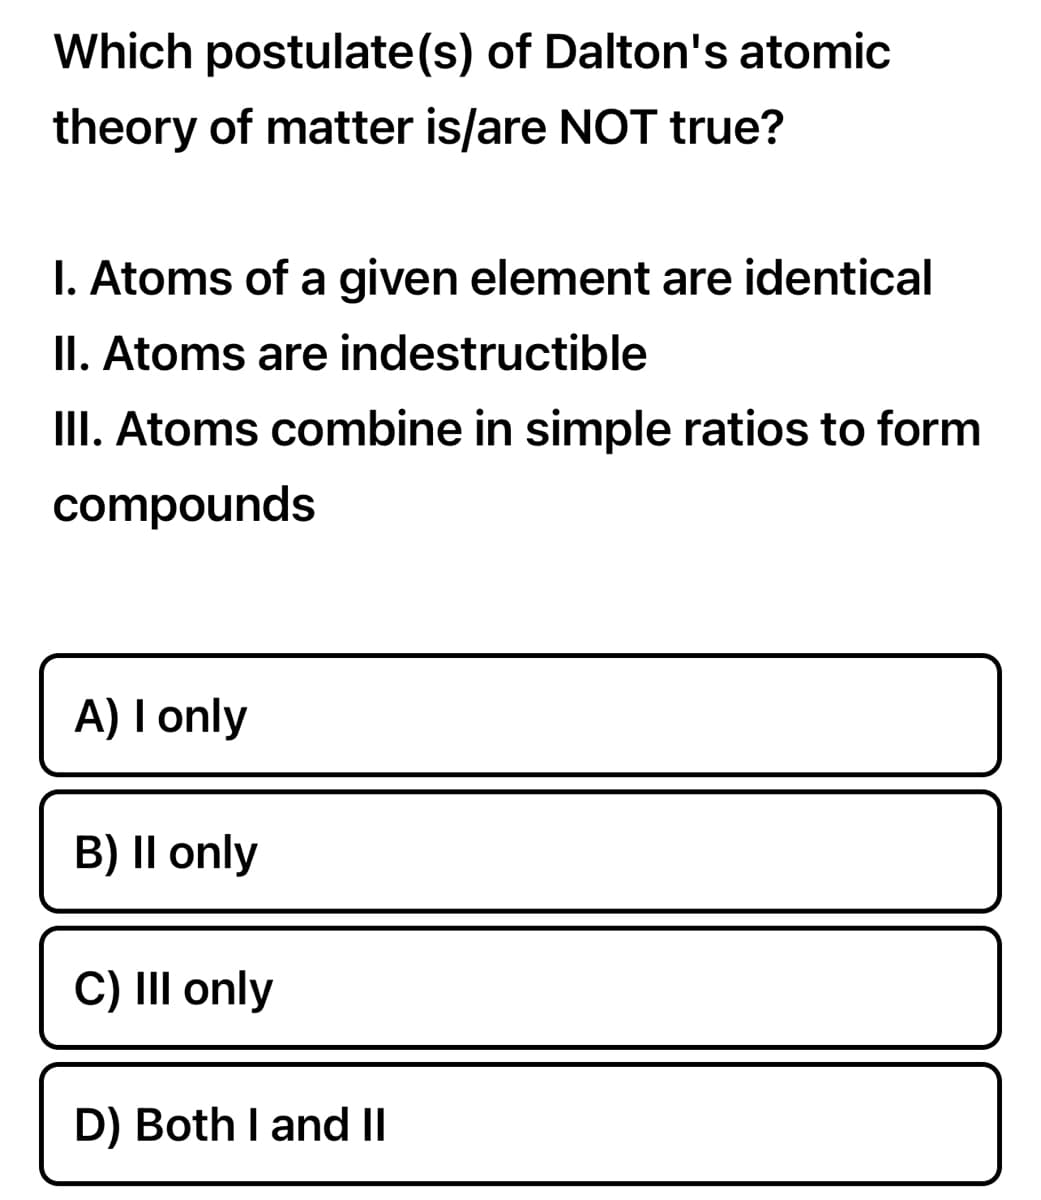 Which postulate(s) of Dalton's atomic
theory of matter is/are NOT true?
1. Atoms of a given element are identical
II. Atoms are indestructible
III. Atoms combine in simple ratios to form
compounds
A) I only
B) II only
C) III only
D) Both I and II